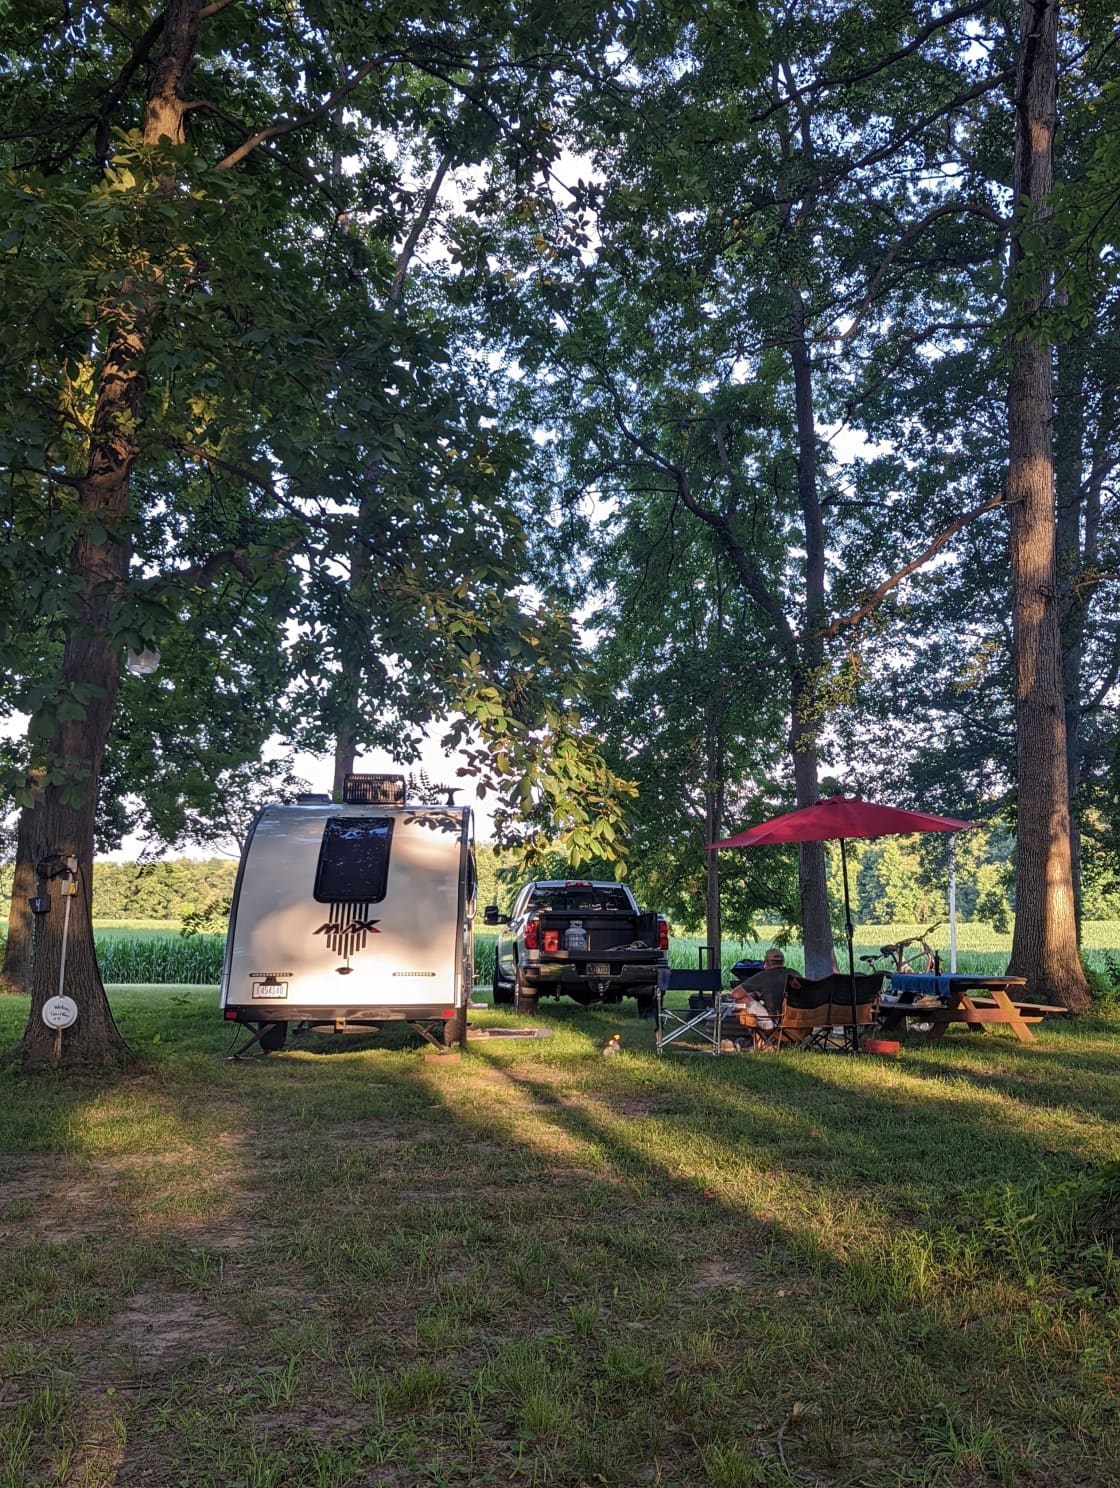 Our campsite was spacious with plenty of space between the other campsites. 